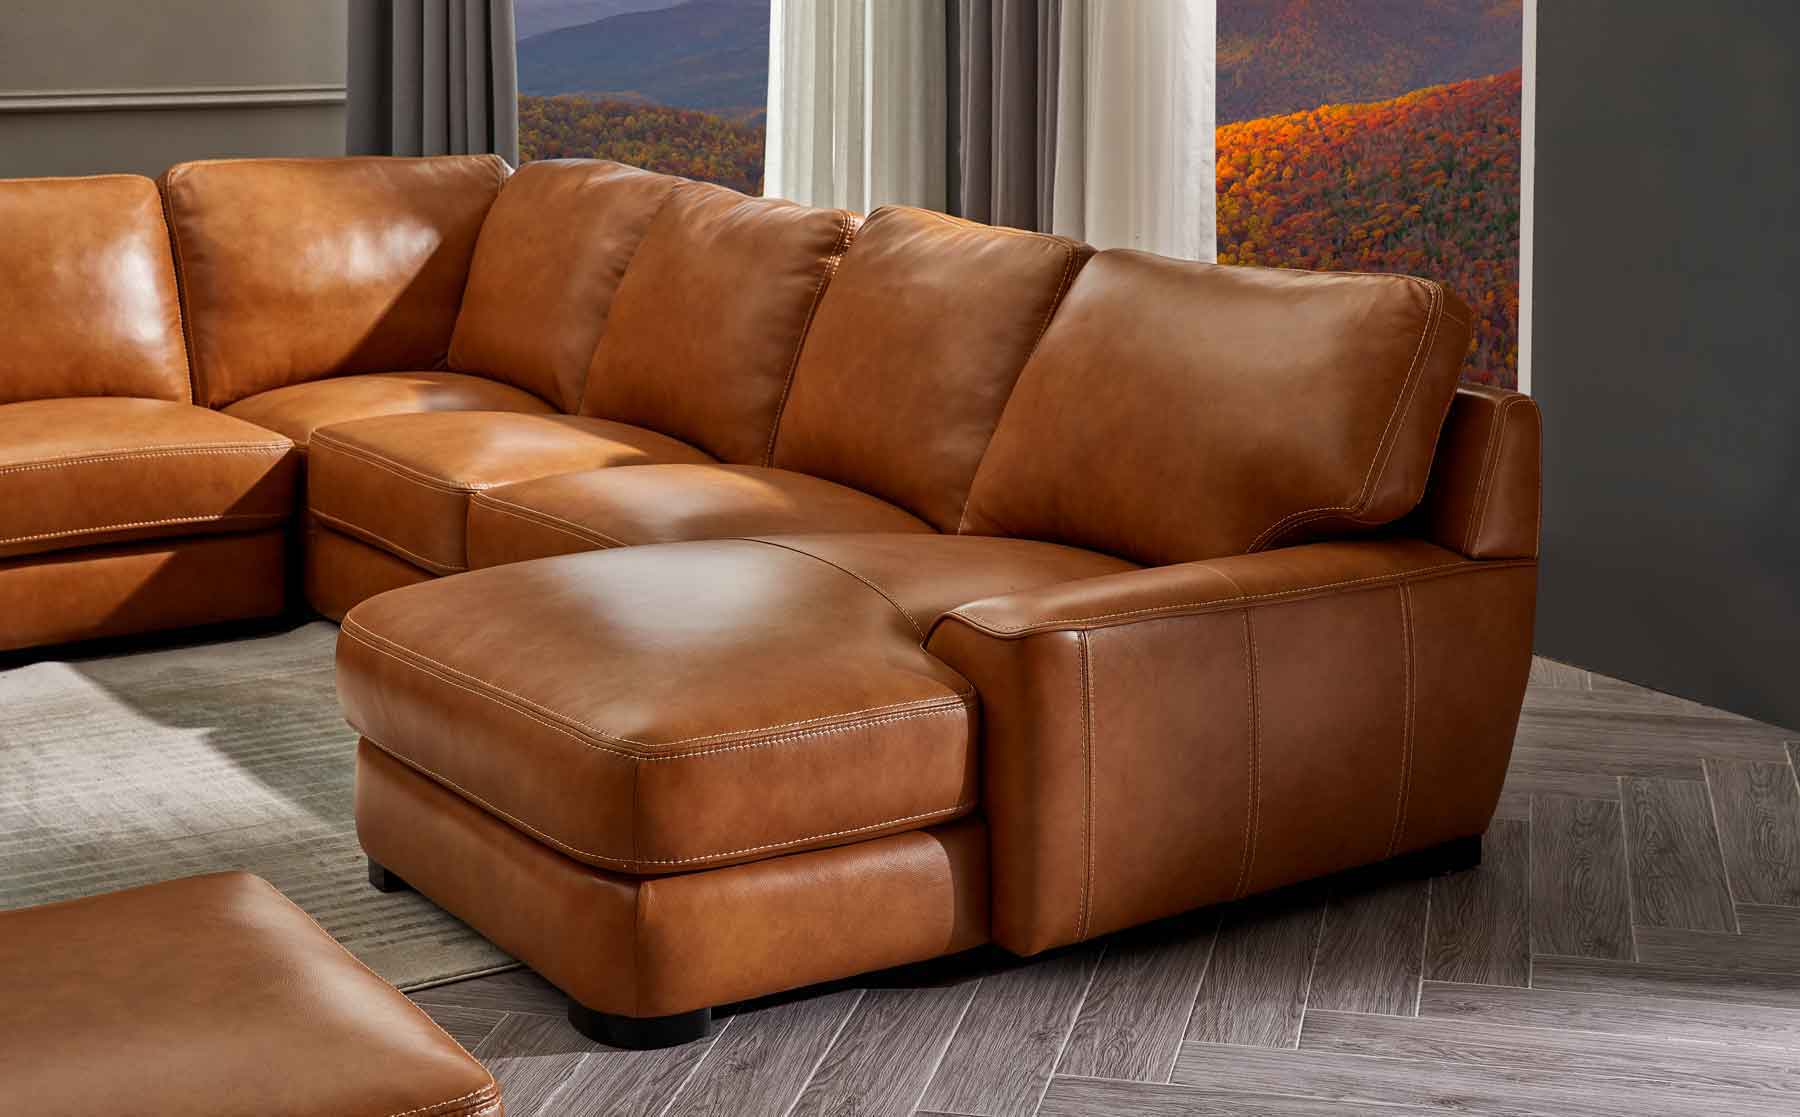 The Cheers Palomino Sectional Product